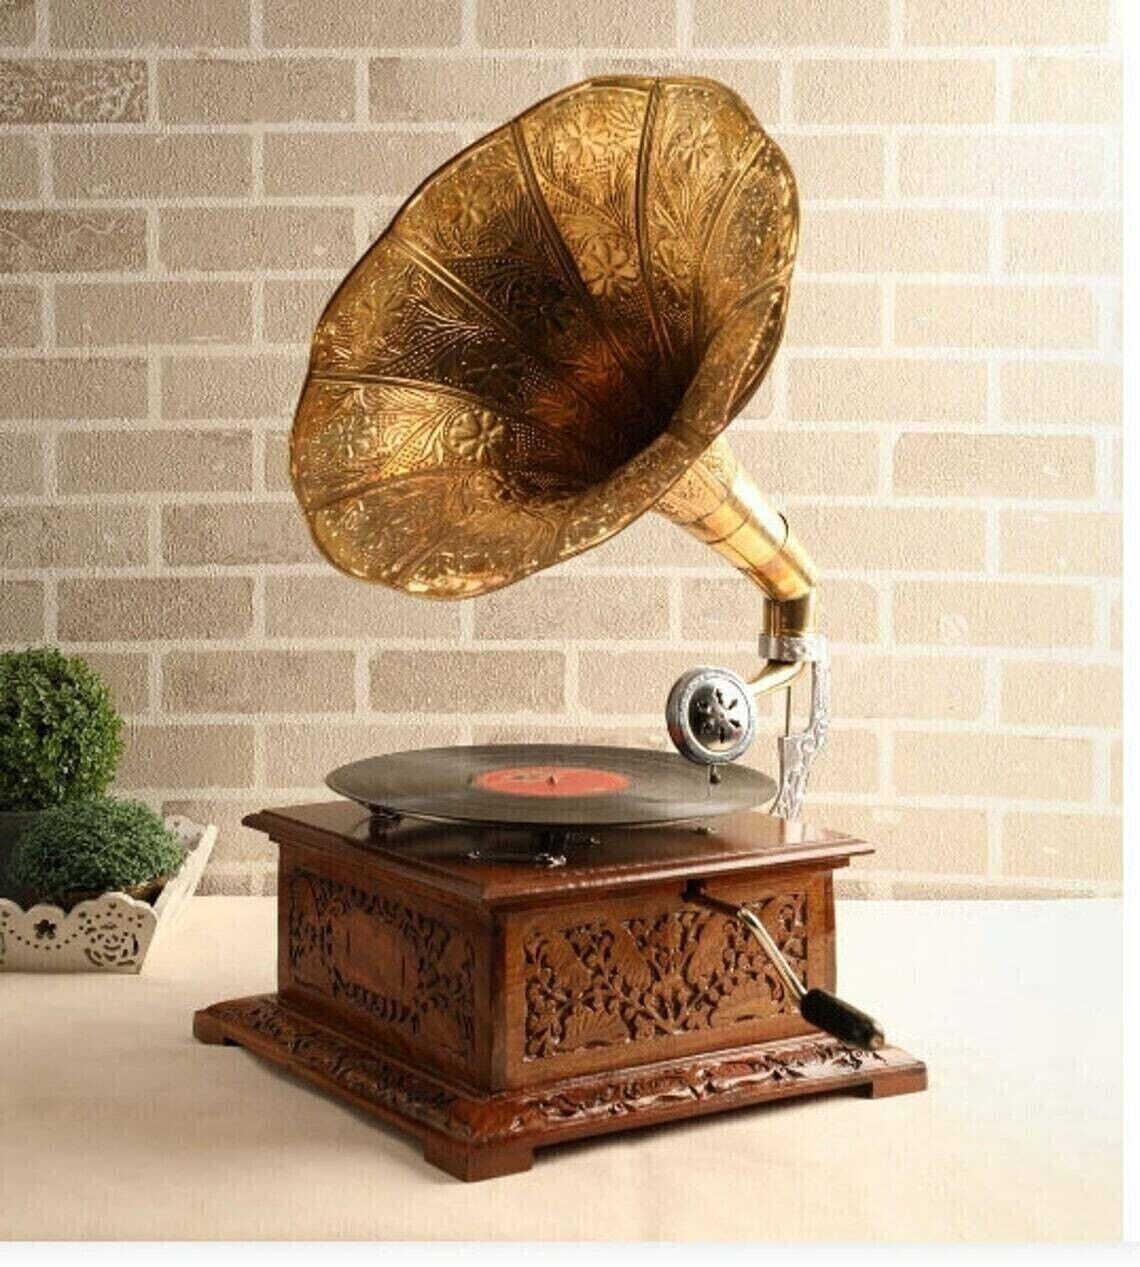 Vintage Antique Look Gramophone Fully Working Phonograph, win-up record player